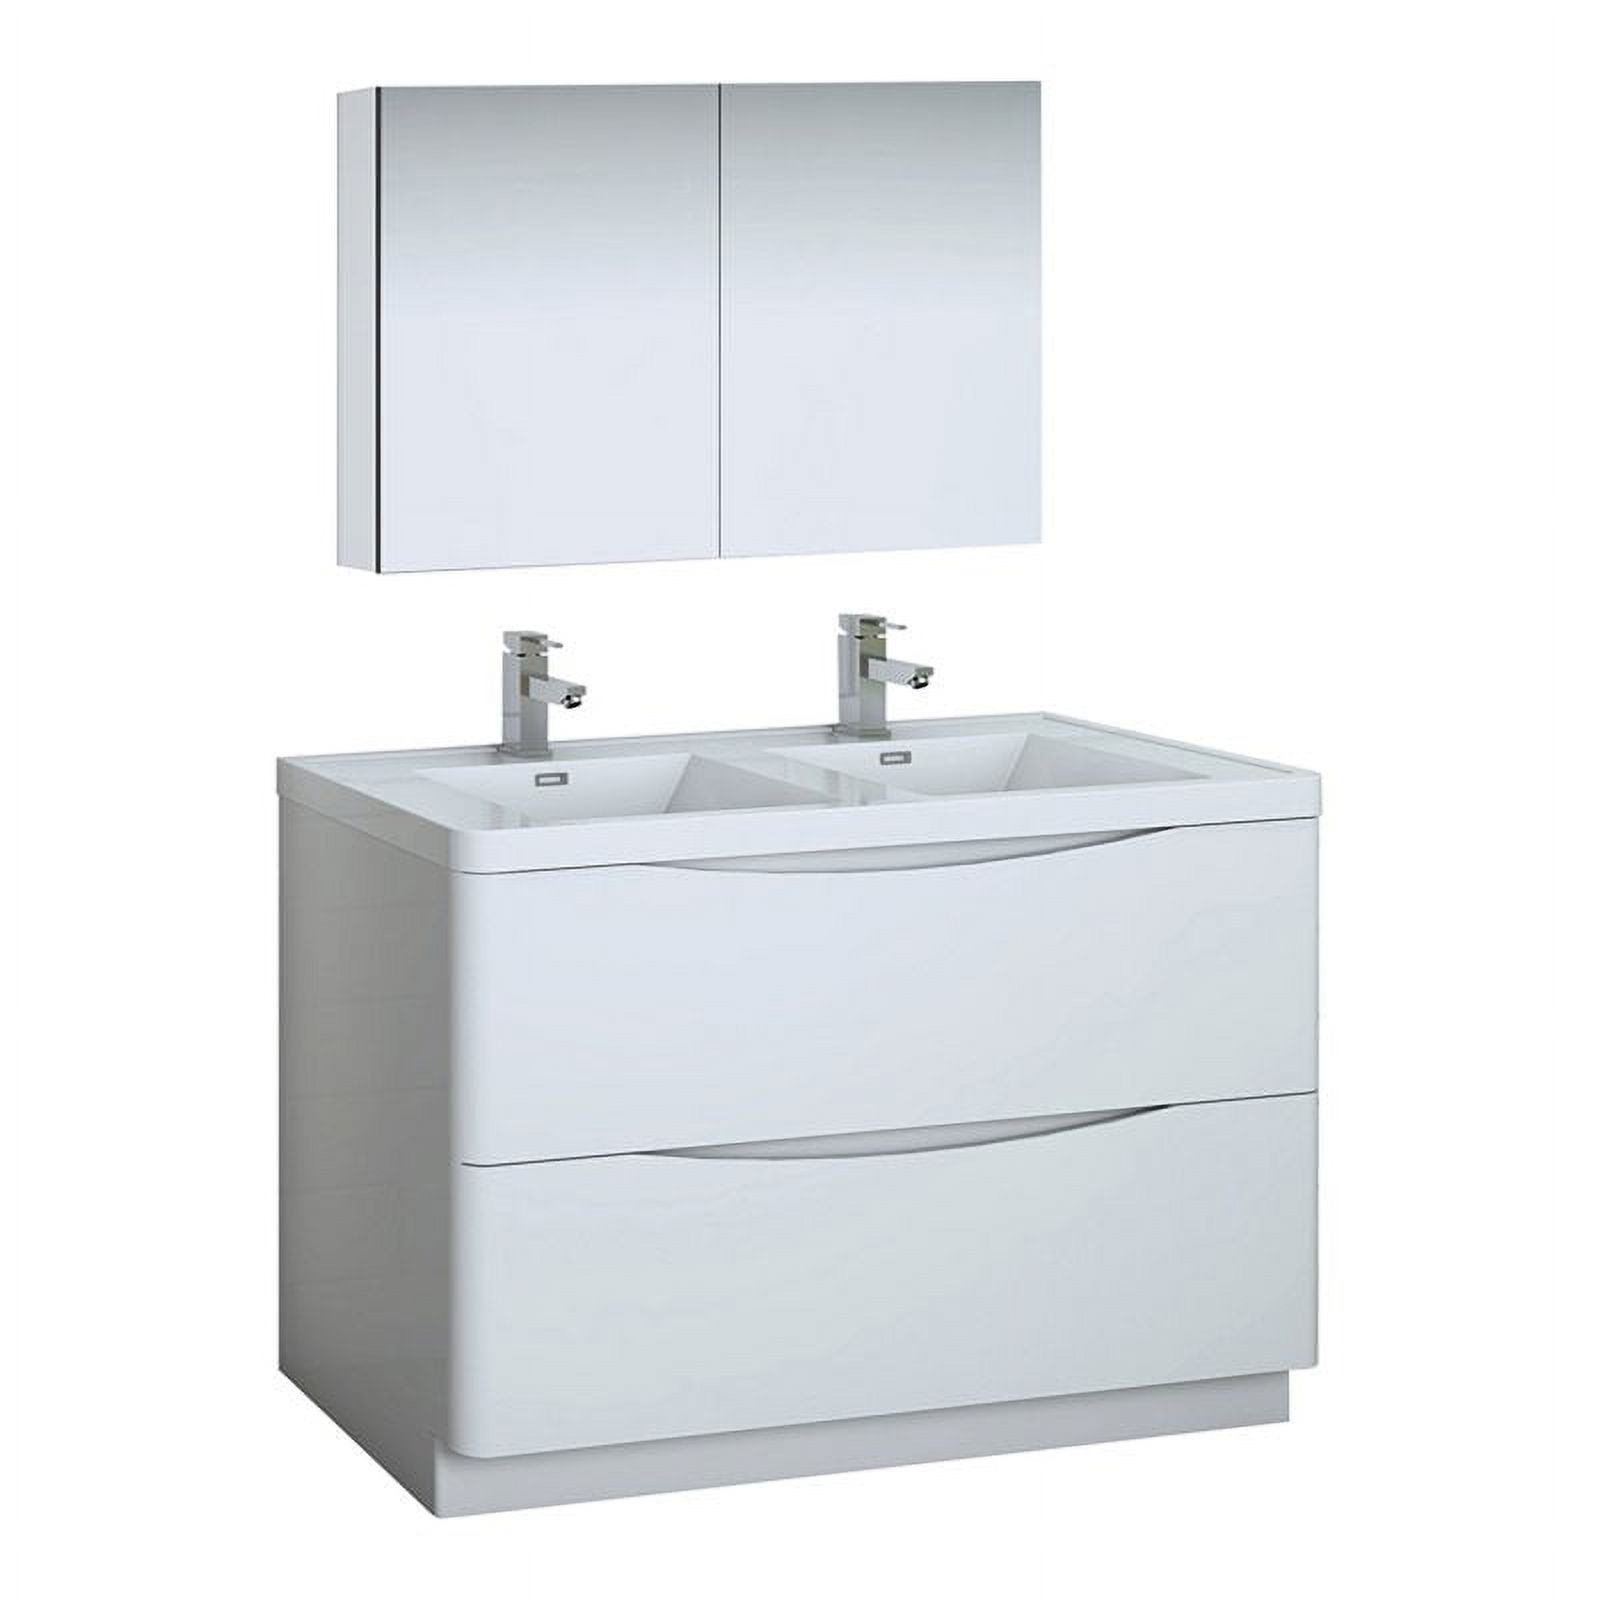 Fresca Tuscany 48" Wood Bathroom Vanity with Double Sinks in Glossy White - image 1 of 8